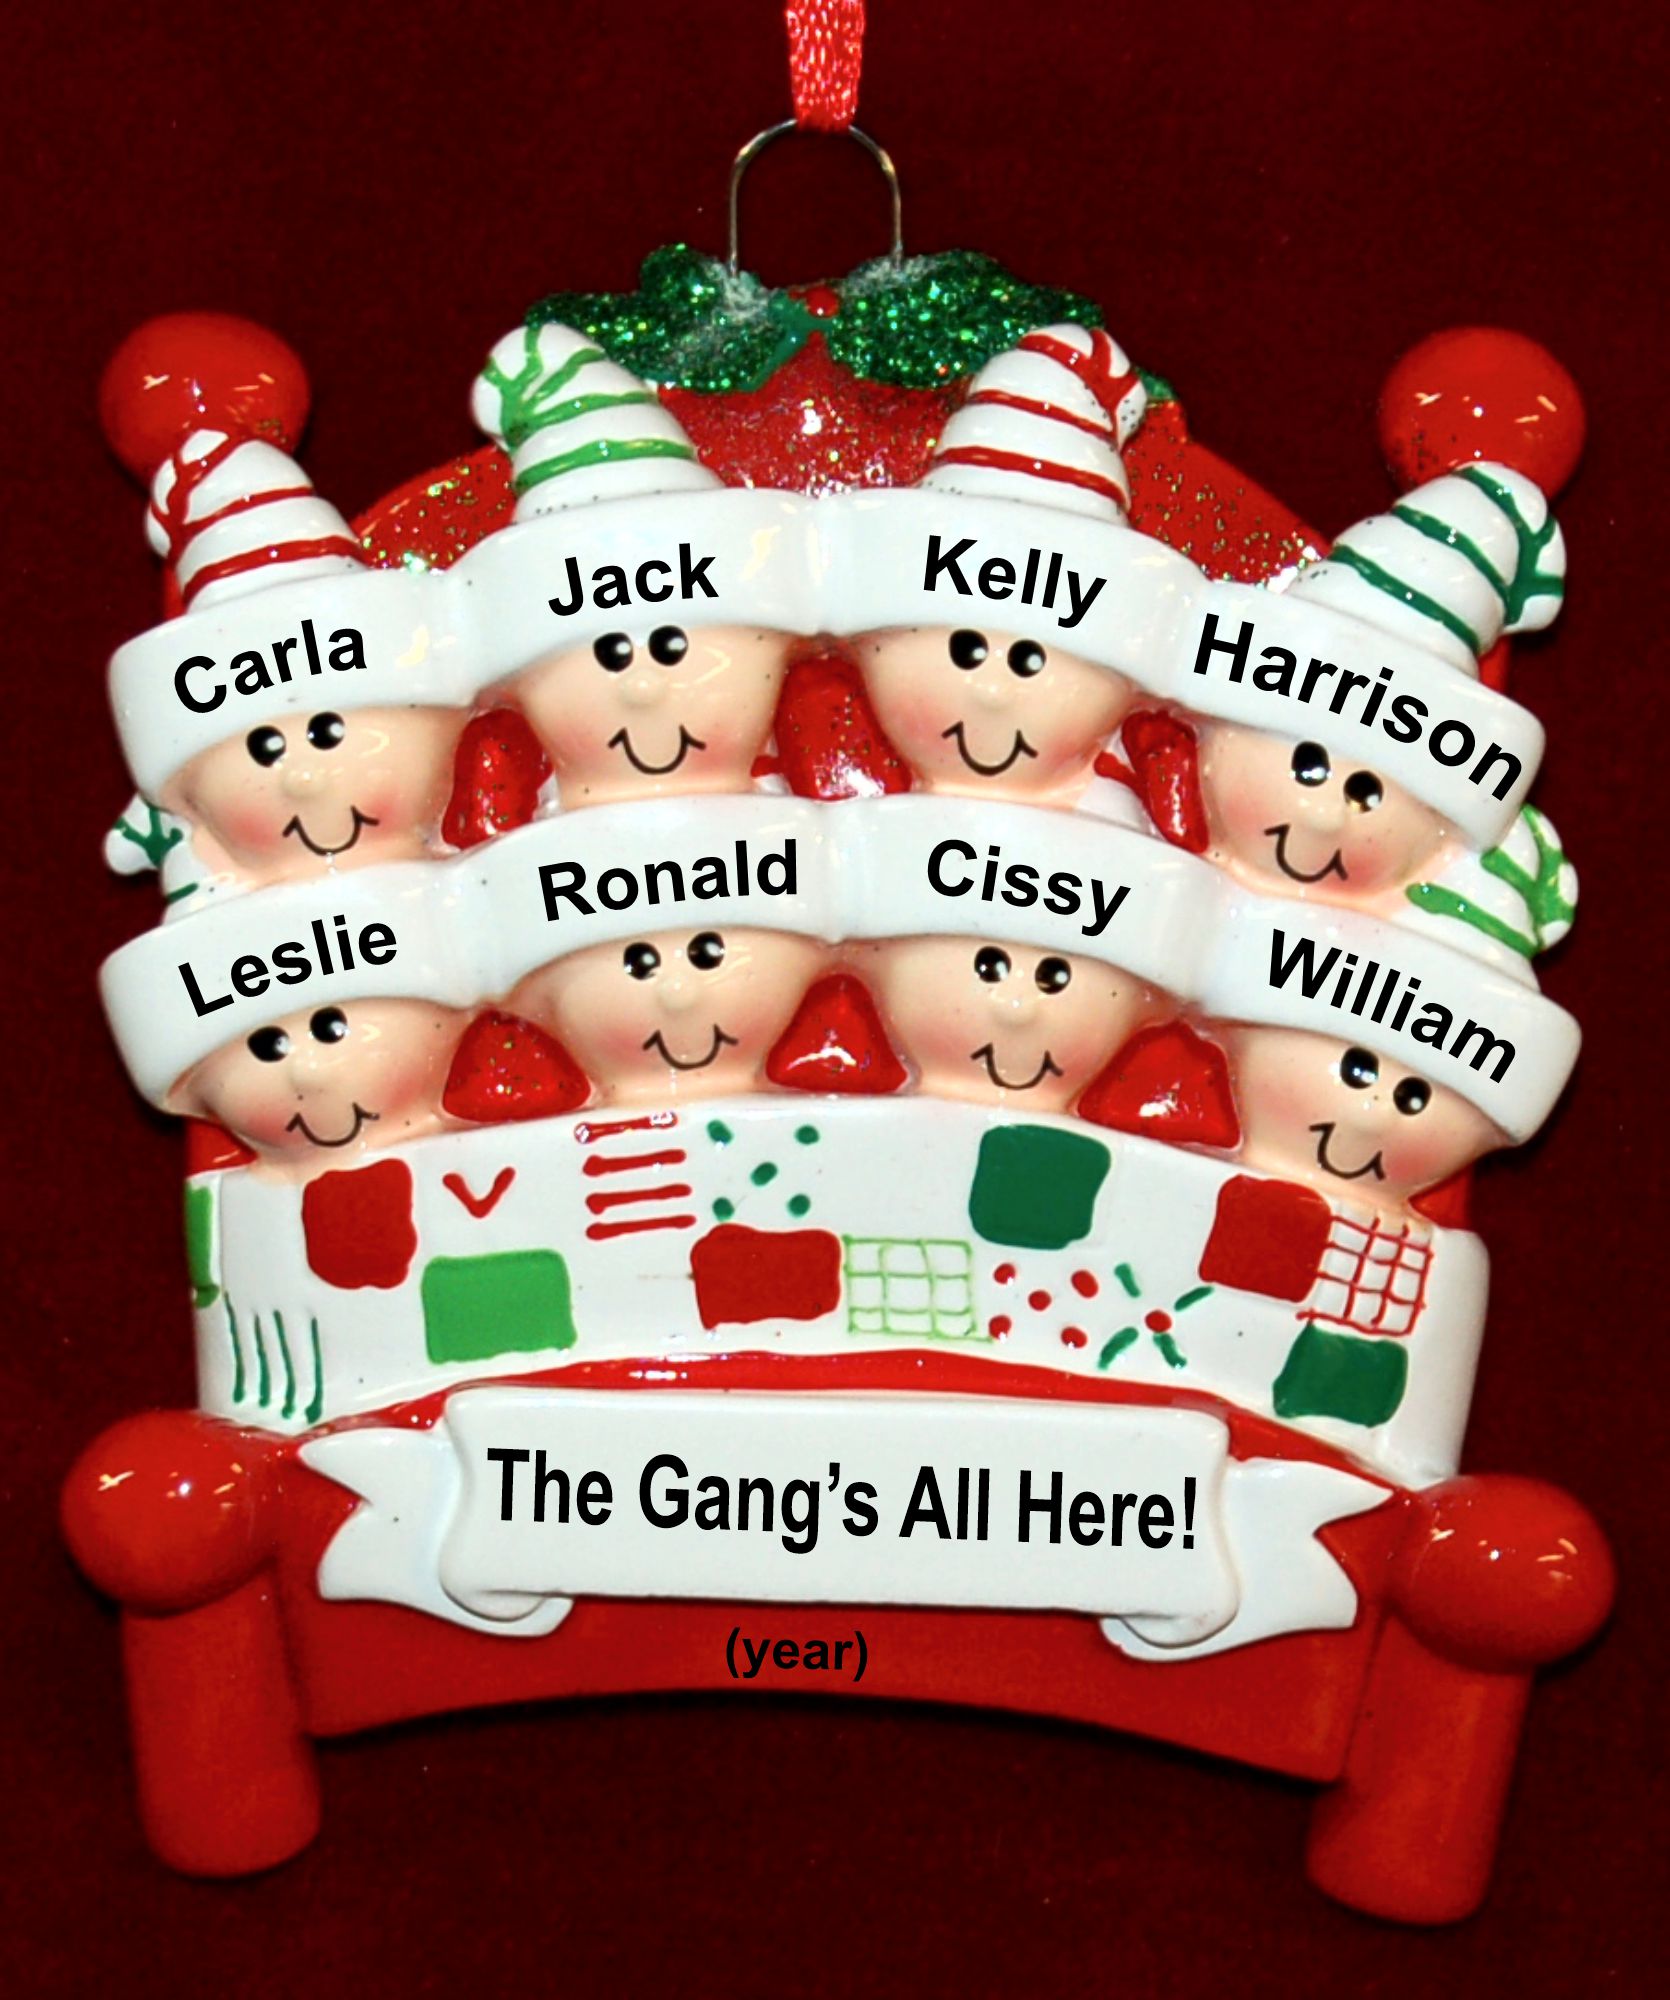 Family Christmas Ornament Winter Fun Just the Kids Personalized FREE by Russell Rhodes